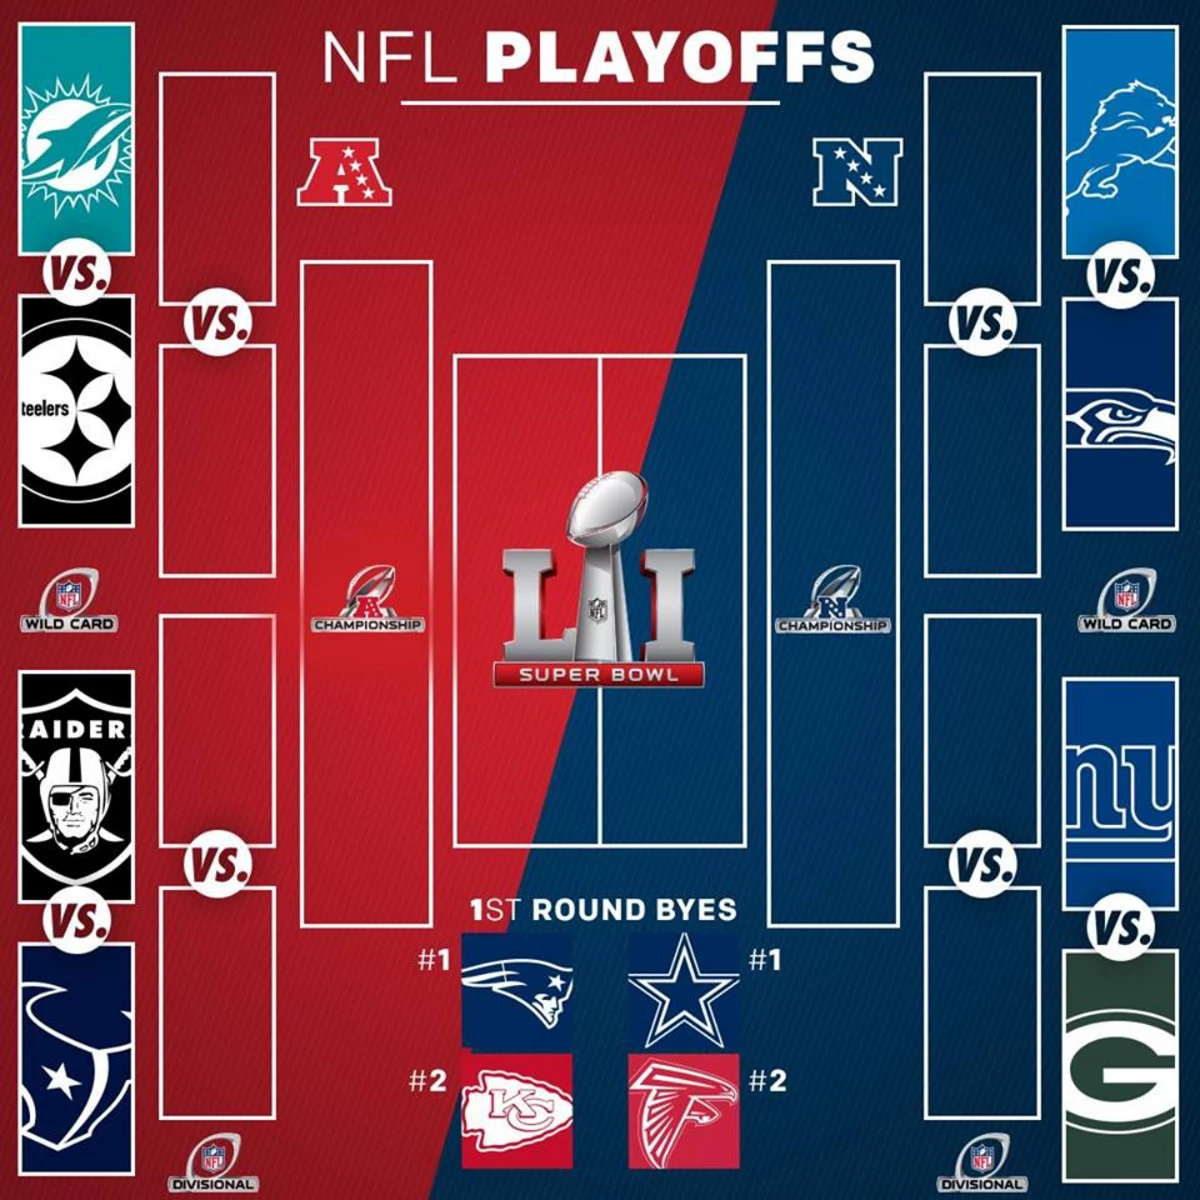 You Asked For It (Not Really) So Here Are My NFL Wildcard Picks